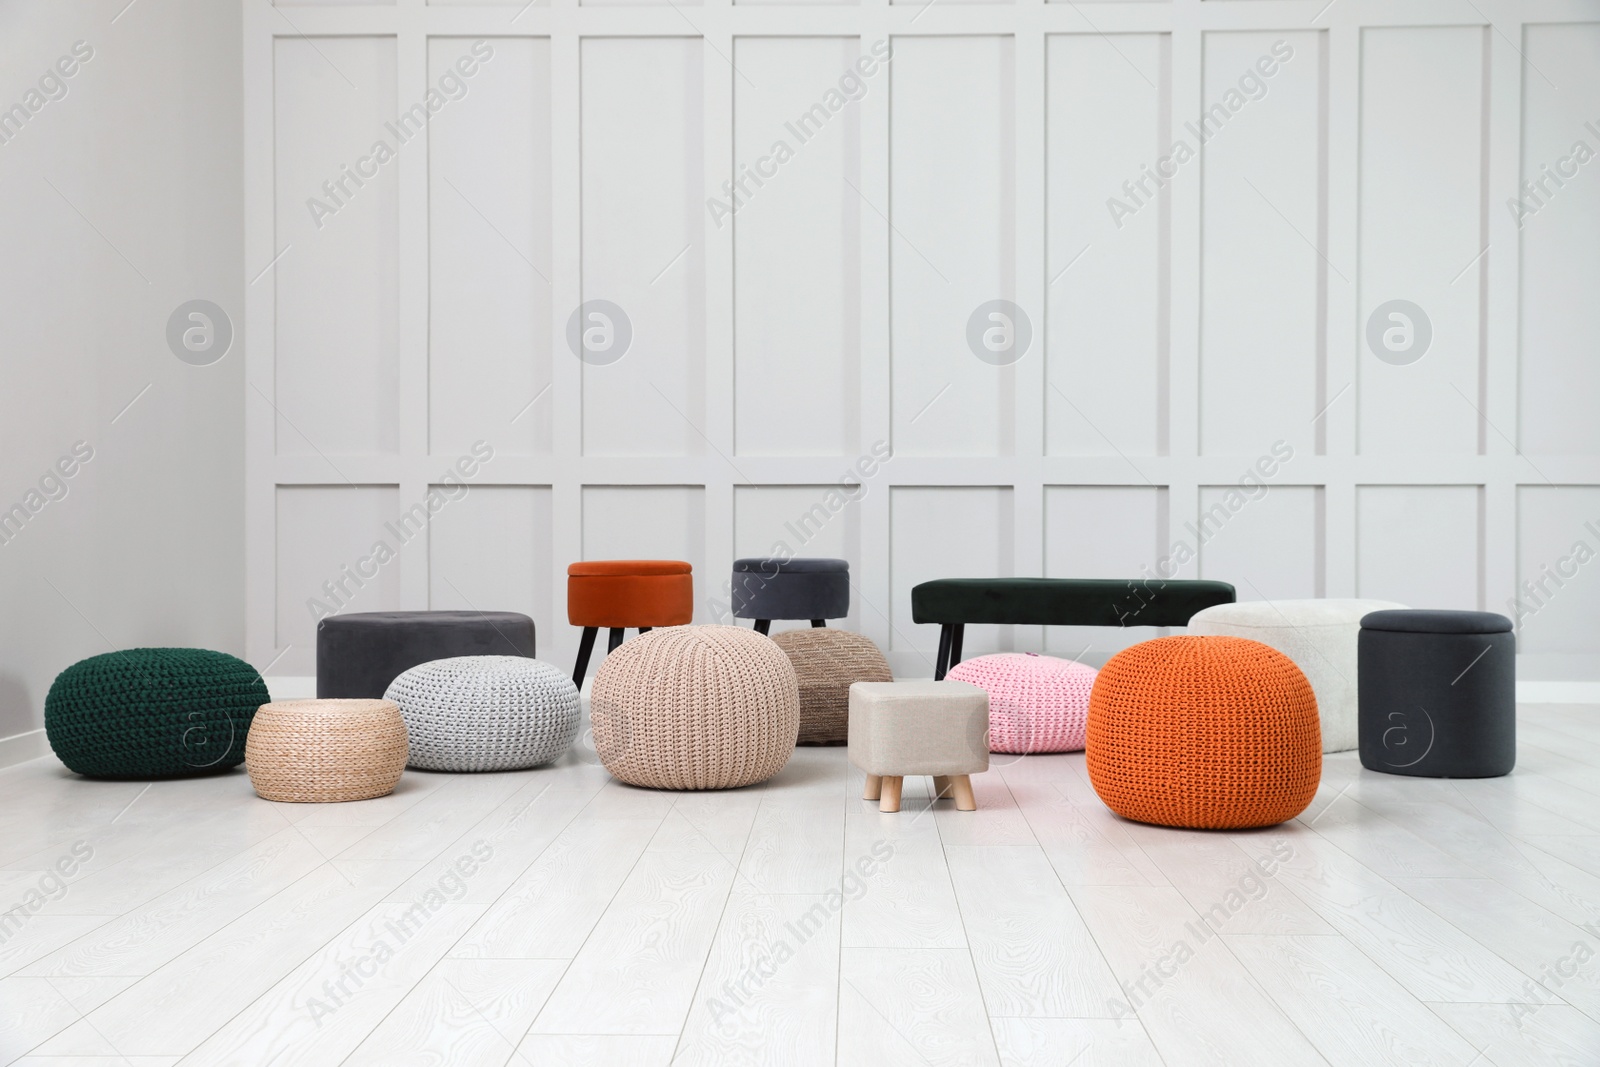 Photo of Different stylish poufs and ottomans in room